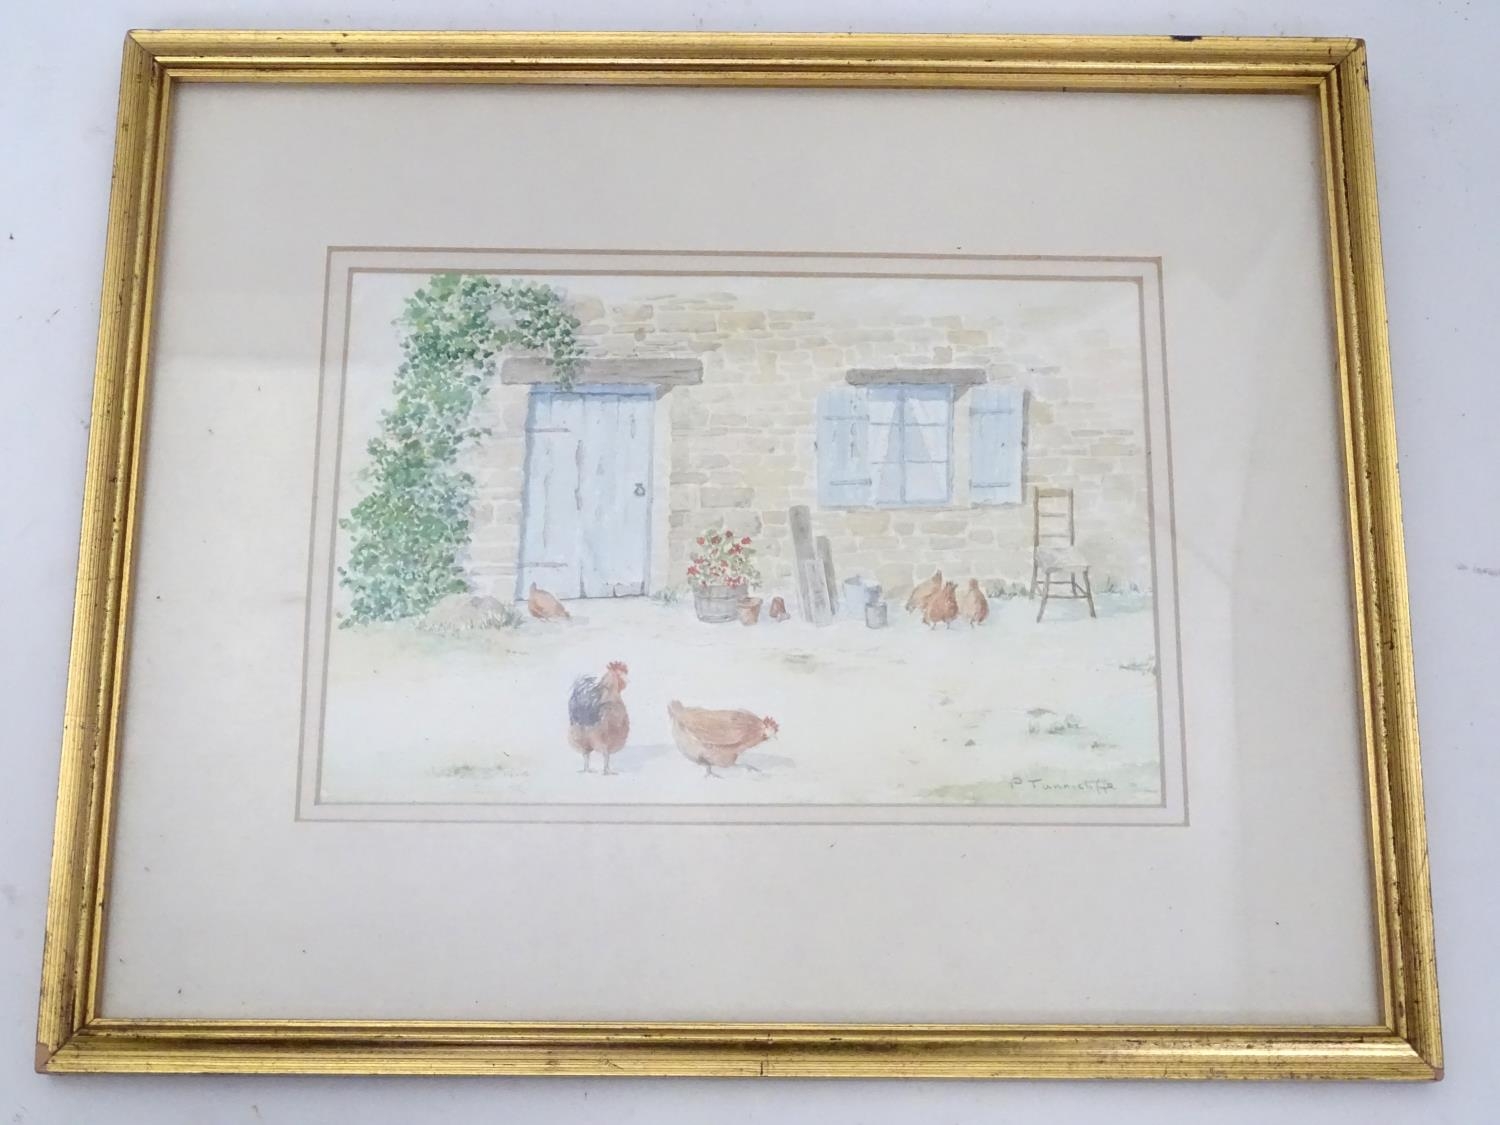 A watercolour depicting chickens in a barnyard, signed P. Tunnicliffe Please Note - we do not make